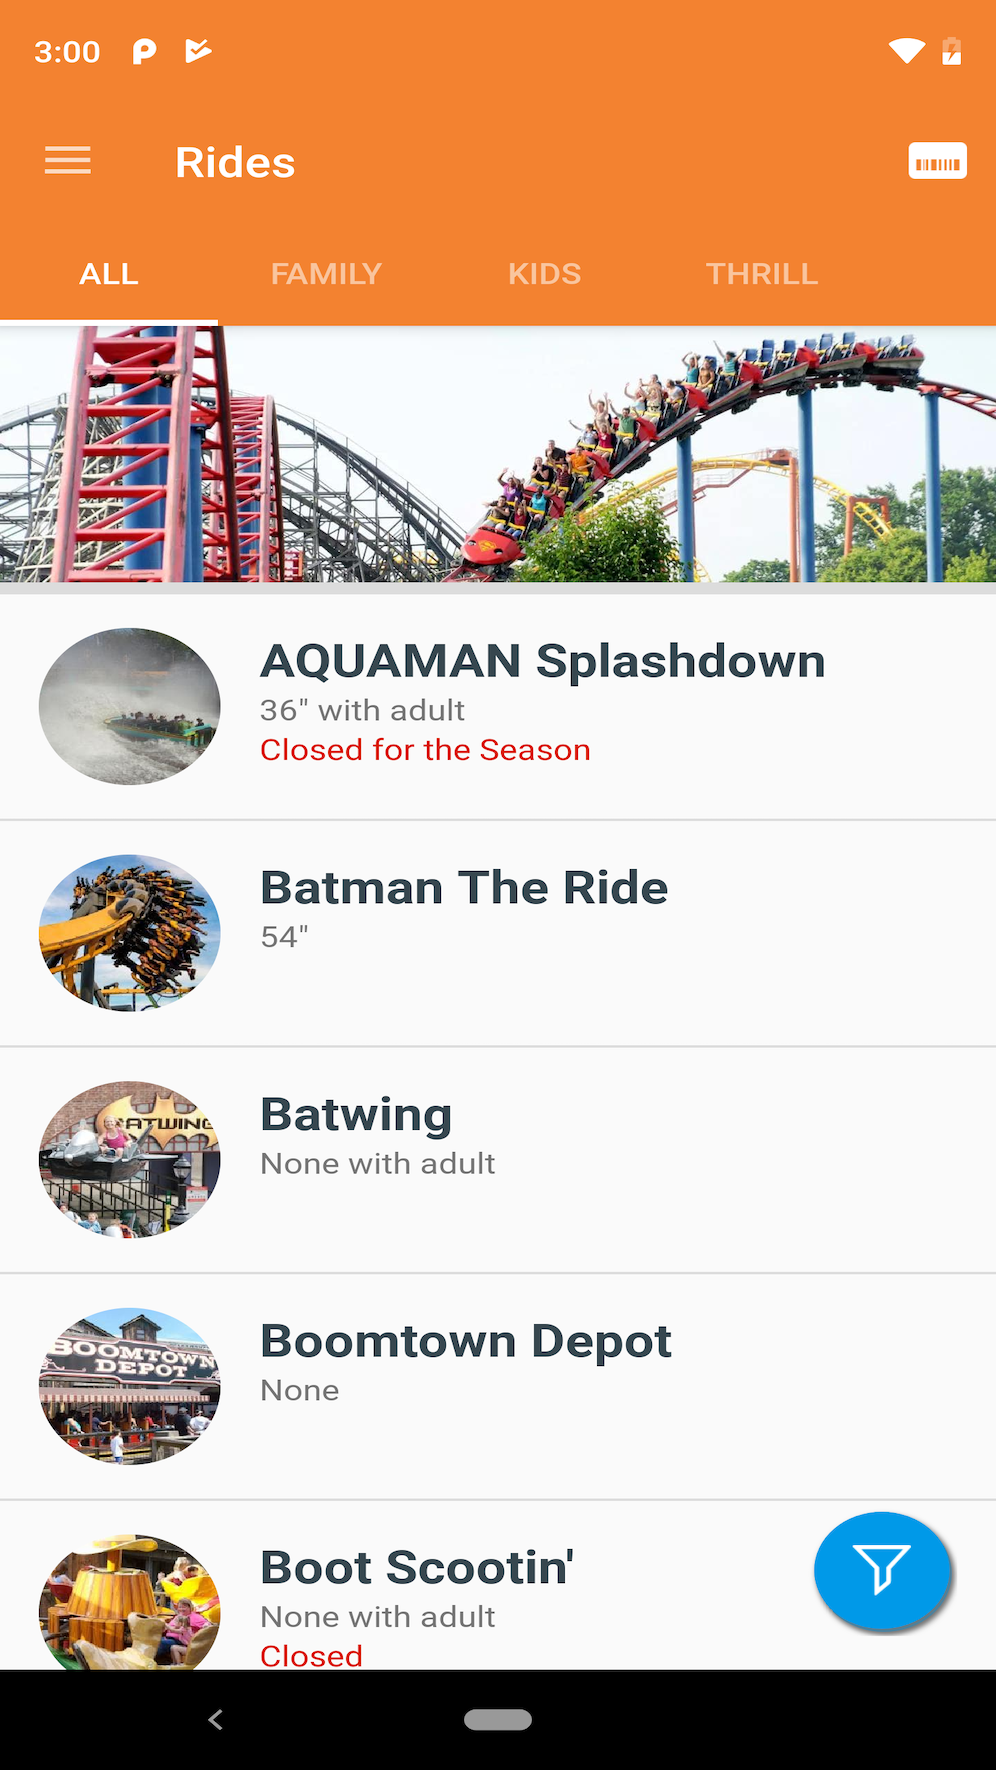 Android application Six Flags screenshort